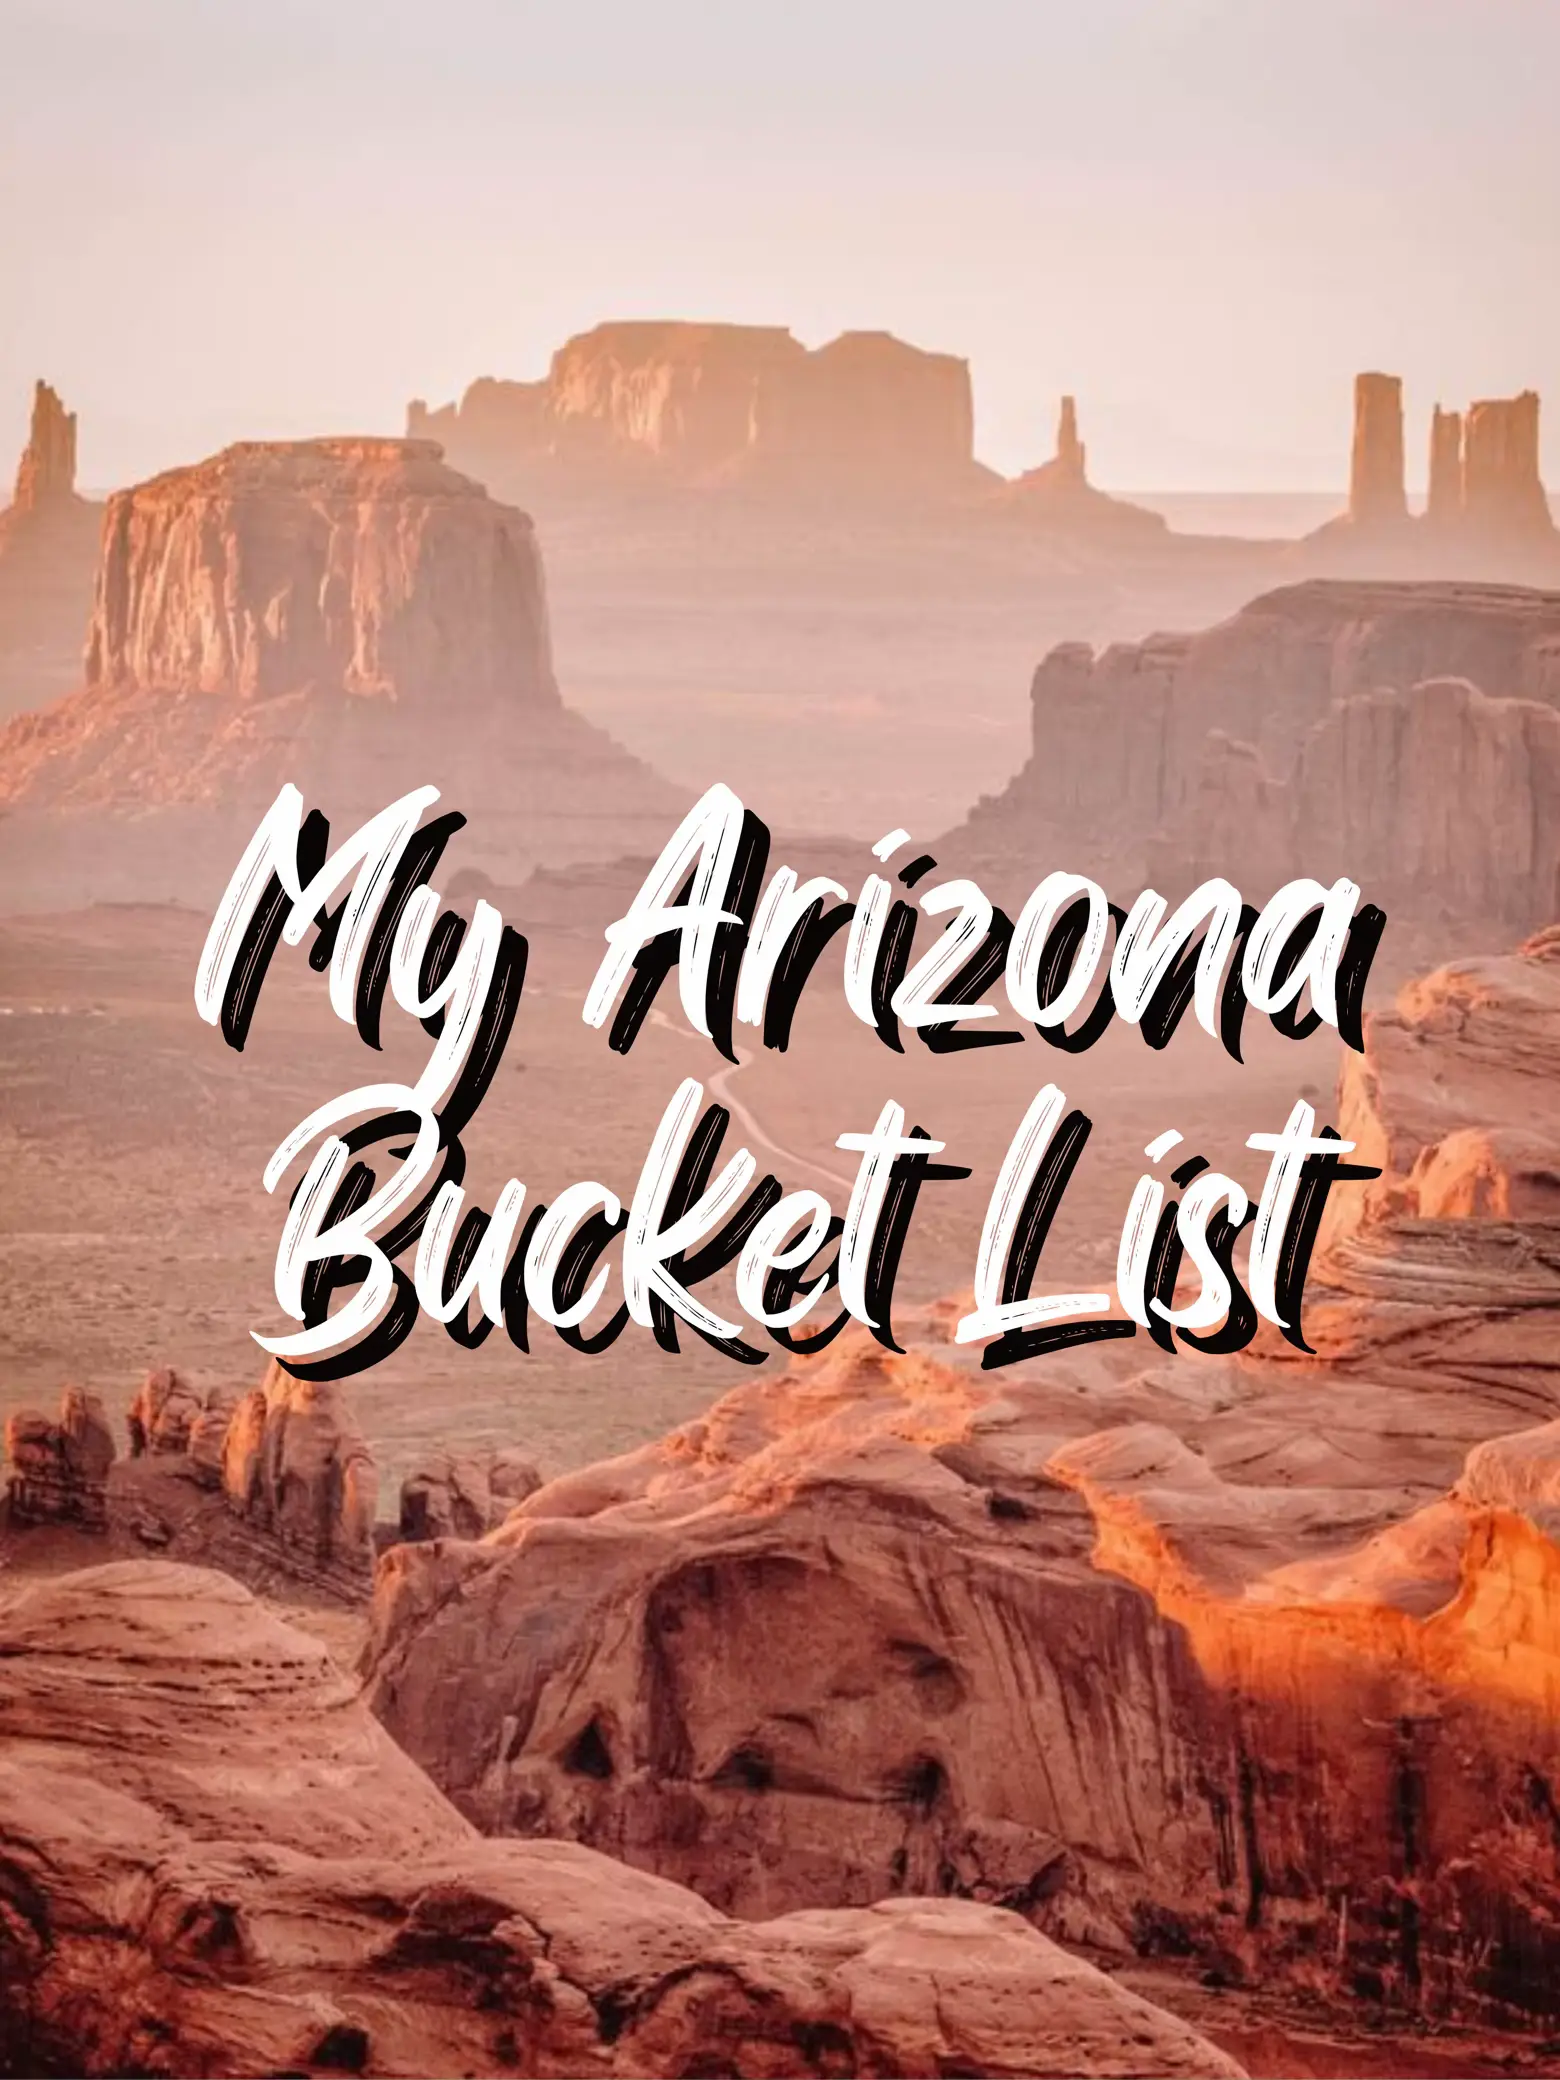  A picture of a rocky mountain with the words "My Arizona Bucket List" written on it.